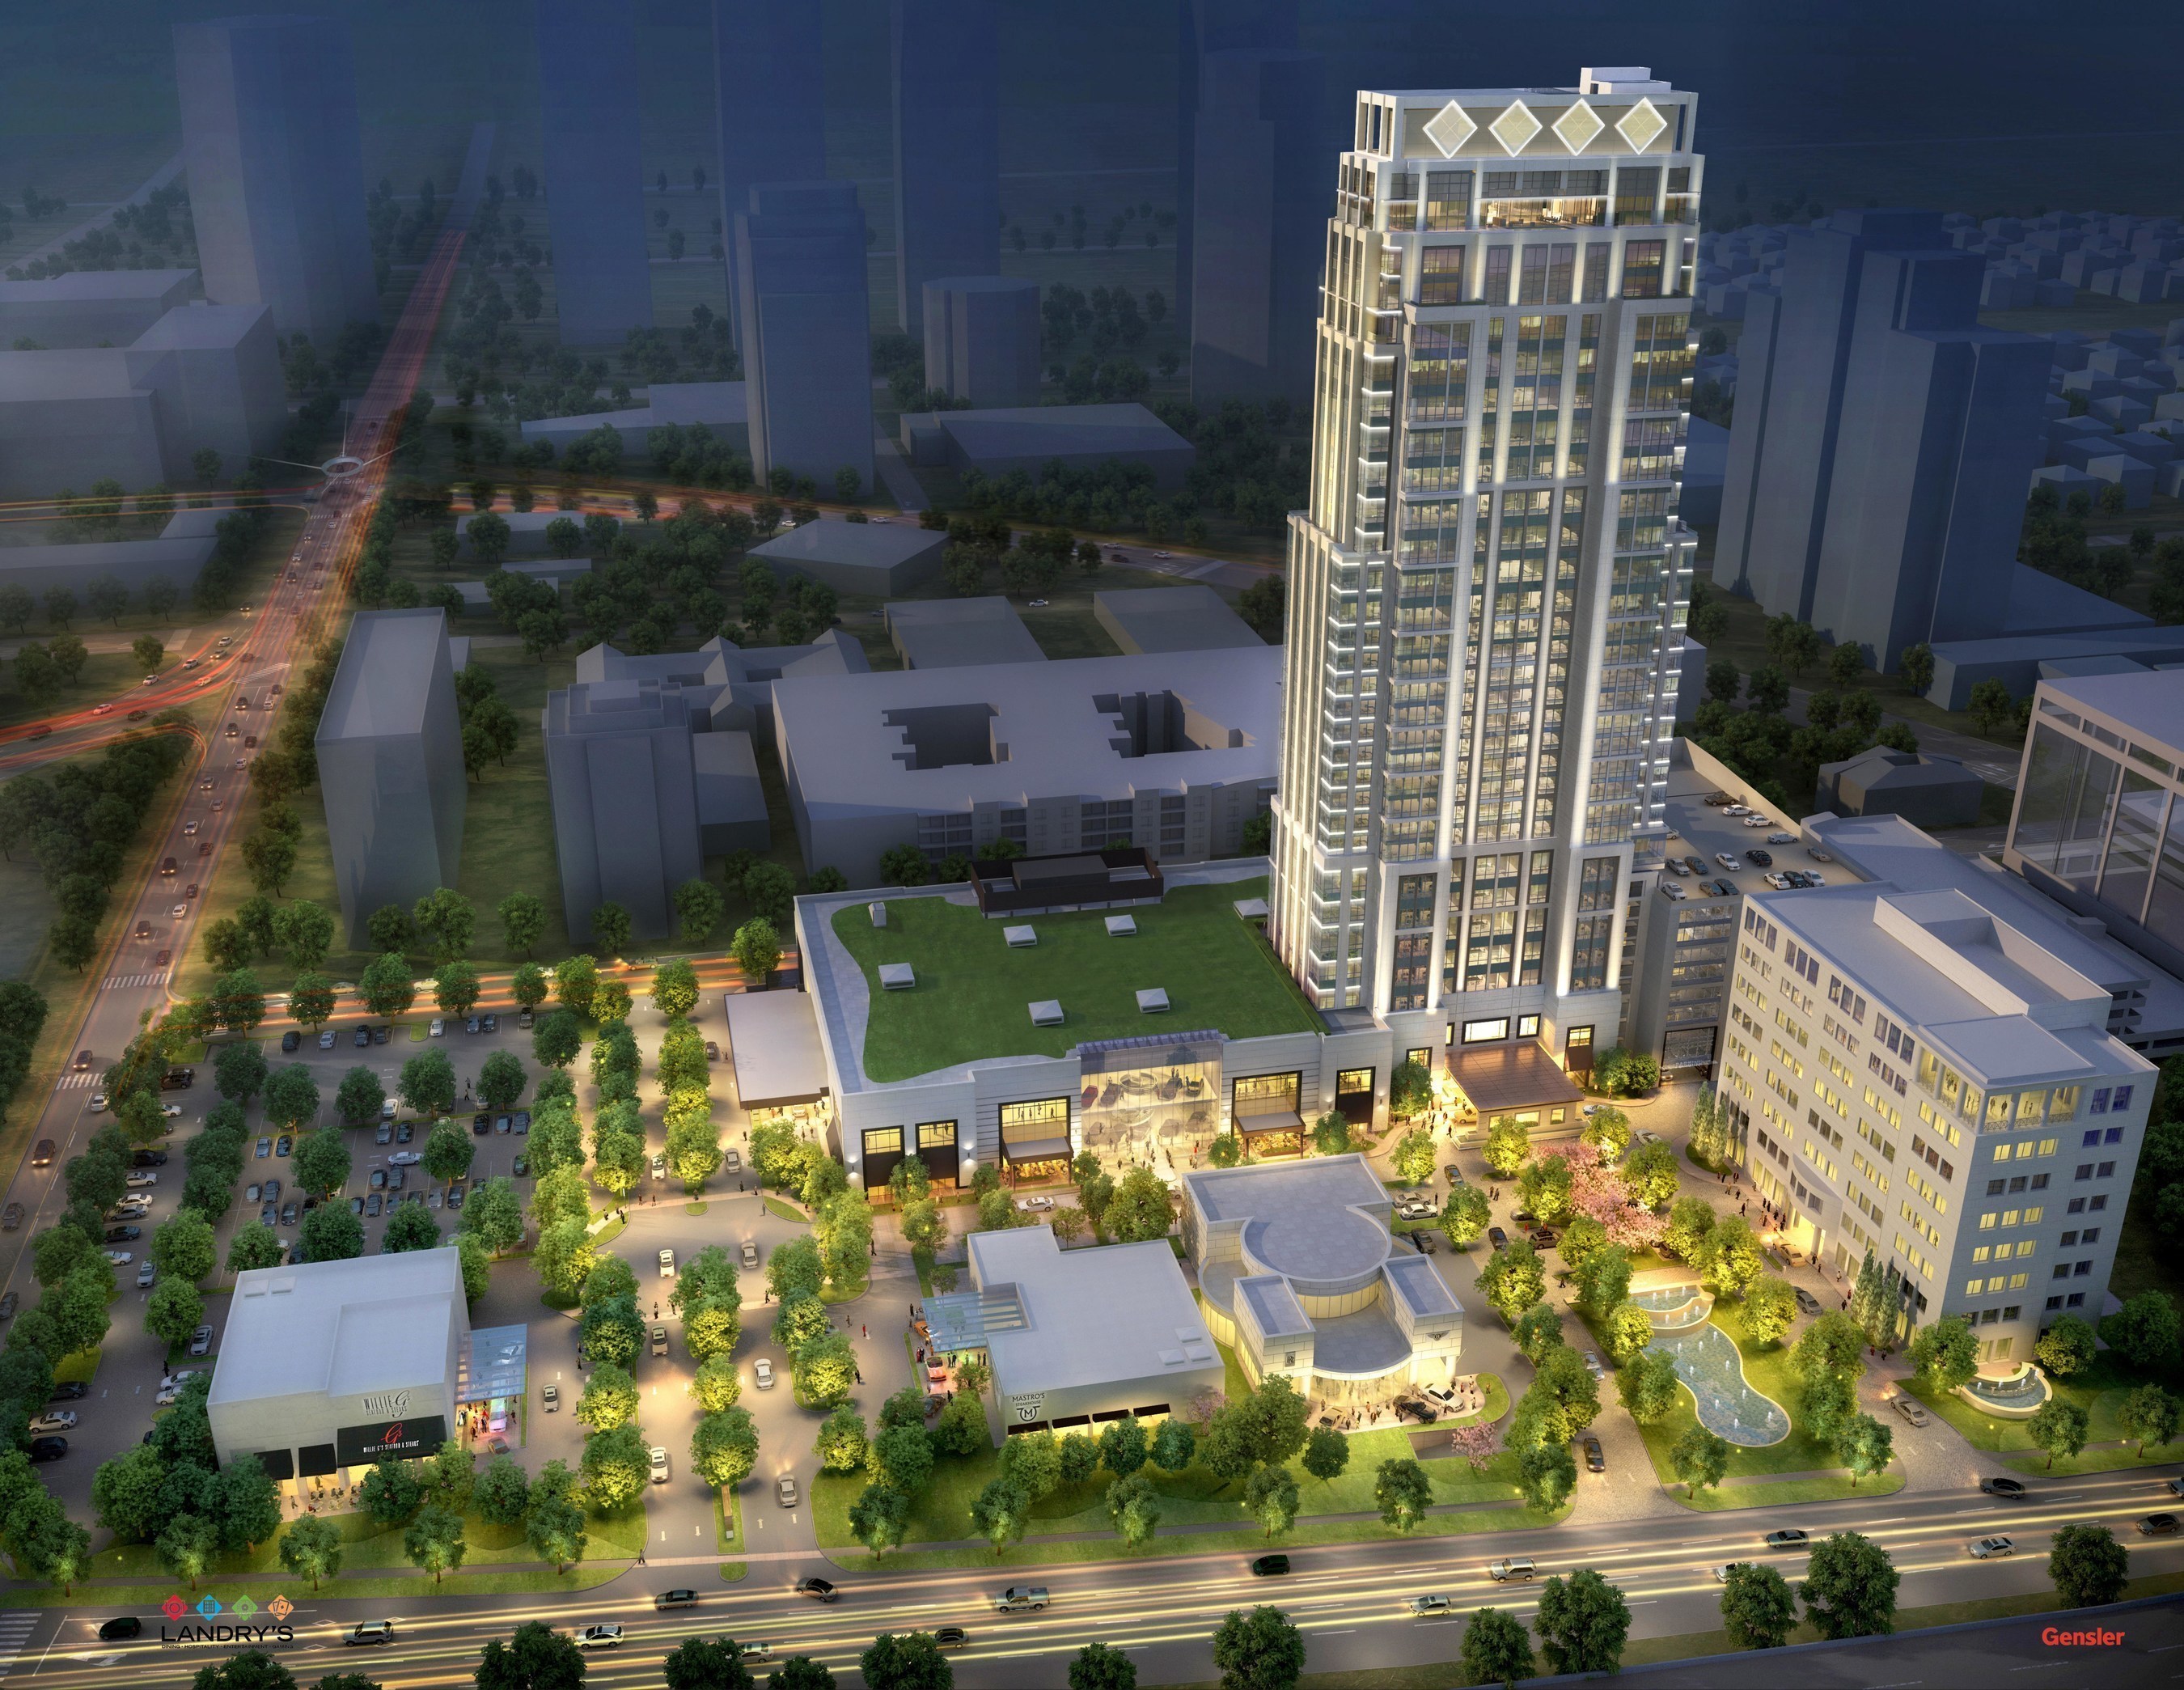 Tilman J. Fertitta unveils his newest venture The Post Oak, a 35-story tower which includes a luxury hotel and mixed-use development on 10-acres in Houston's prestigious Galleria/Uptown area.